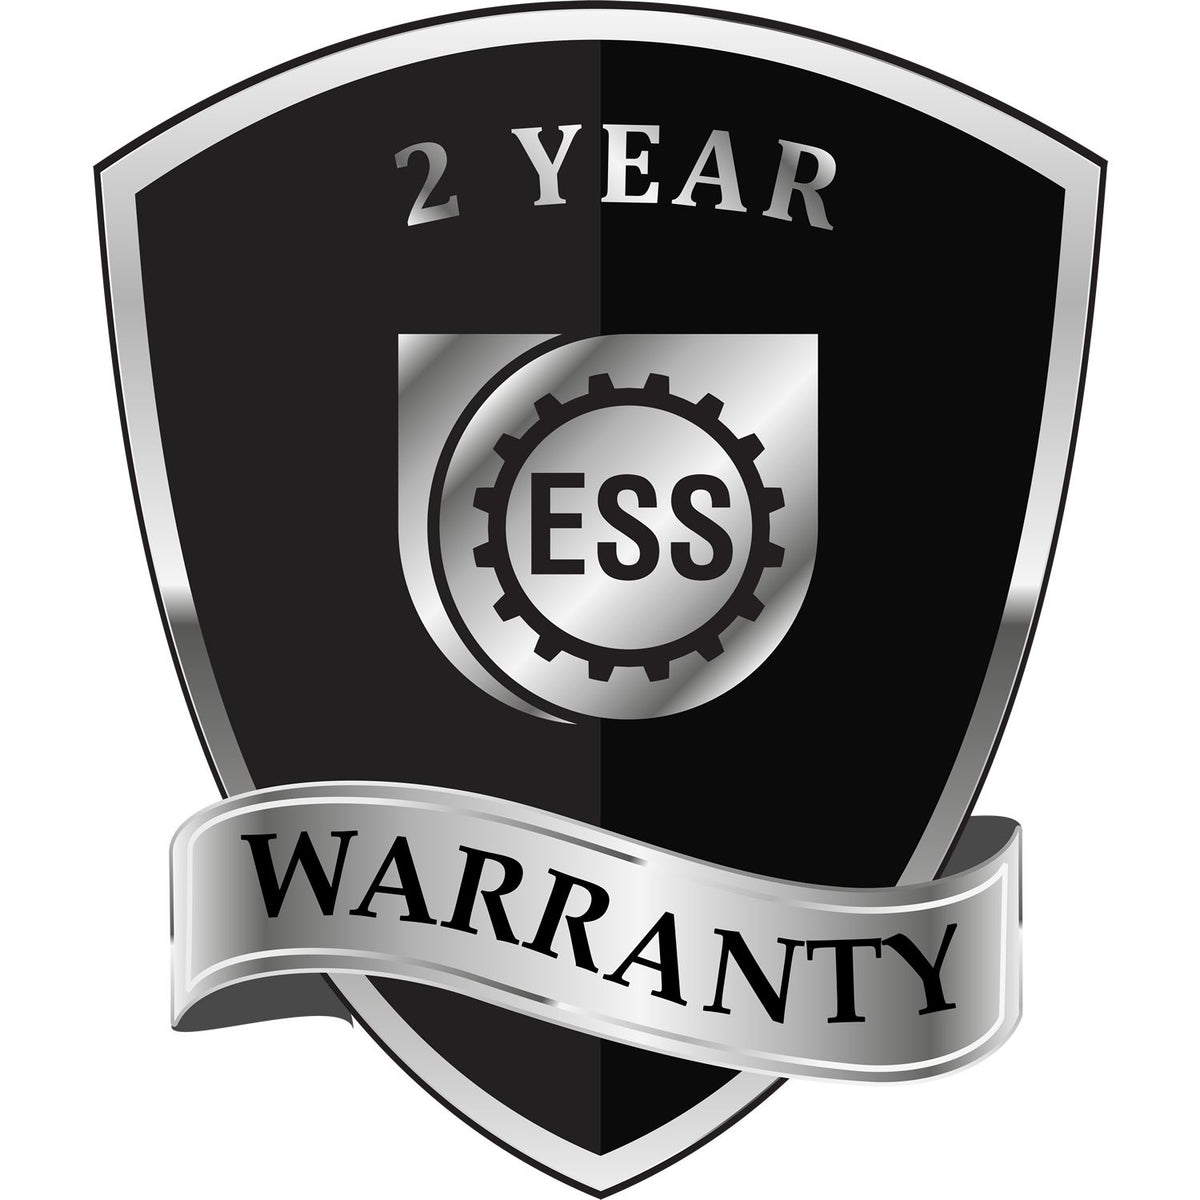 A black and silver badge or emblem showing warranty information for the Hybrid North Dakota Architect Seal